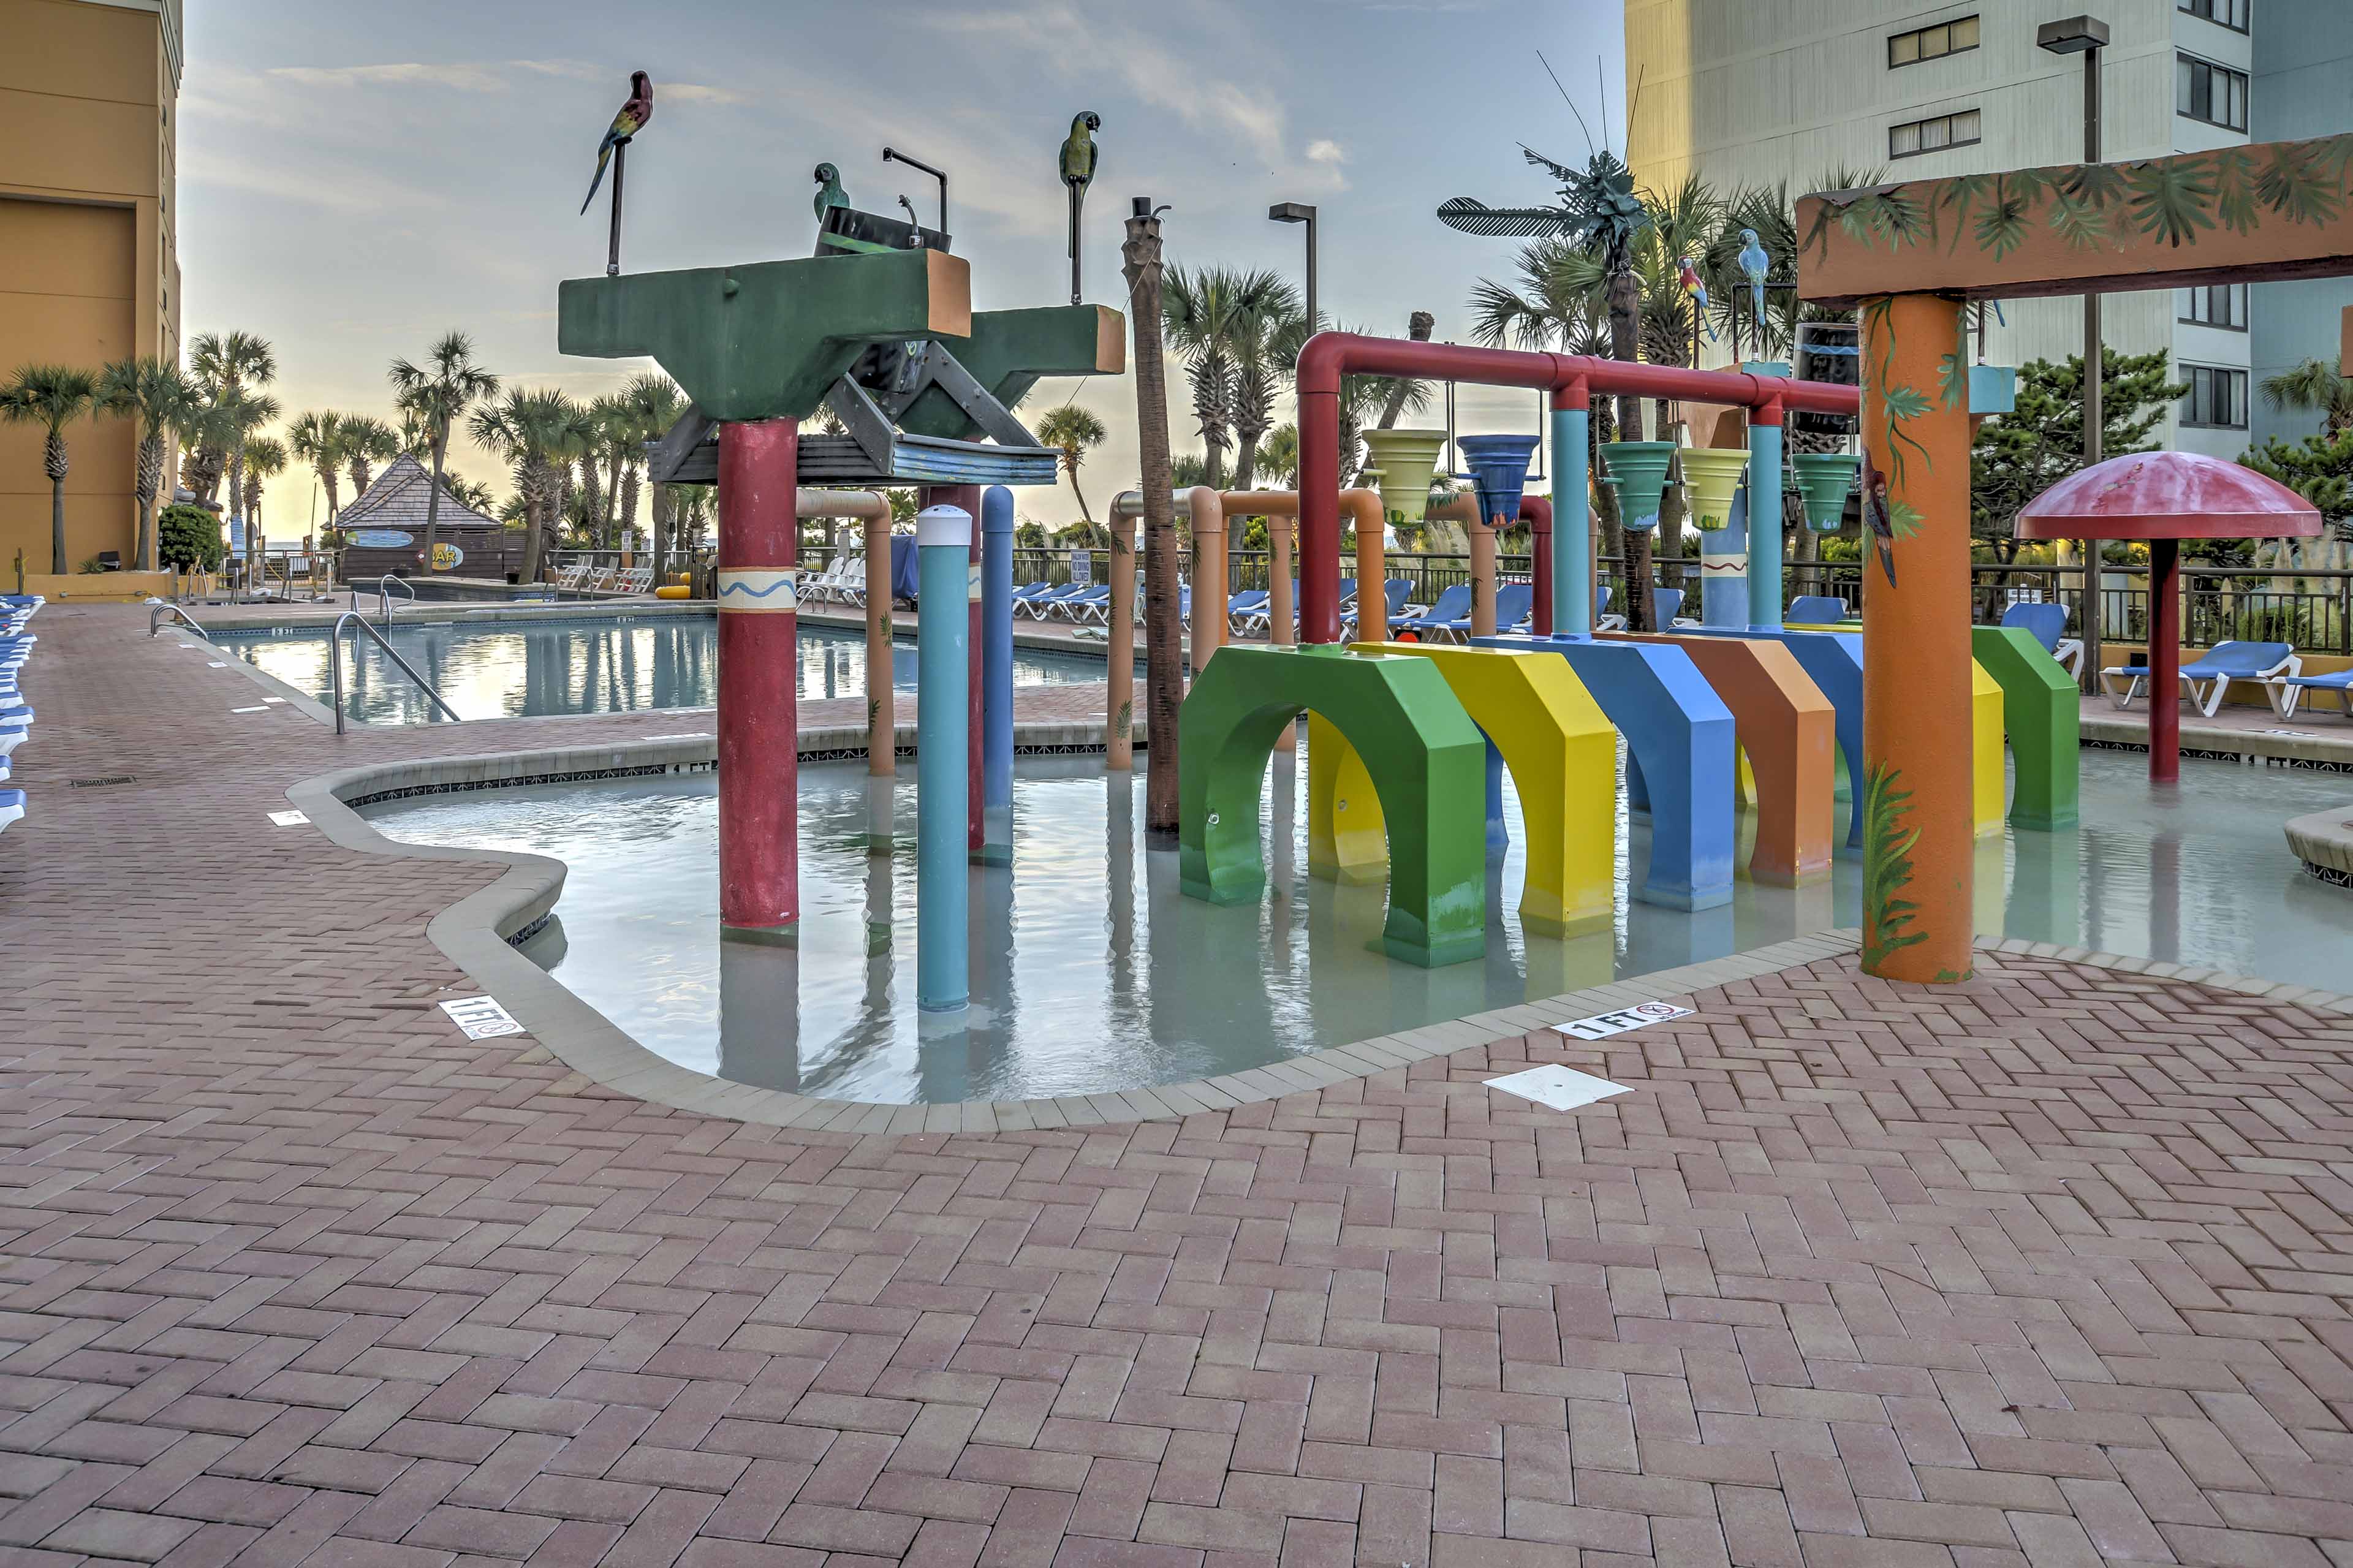 Kids will love spending time at the kiddie pool.